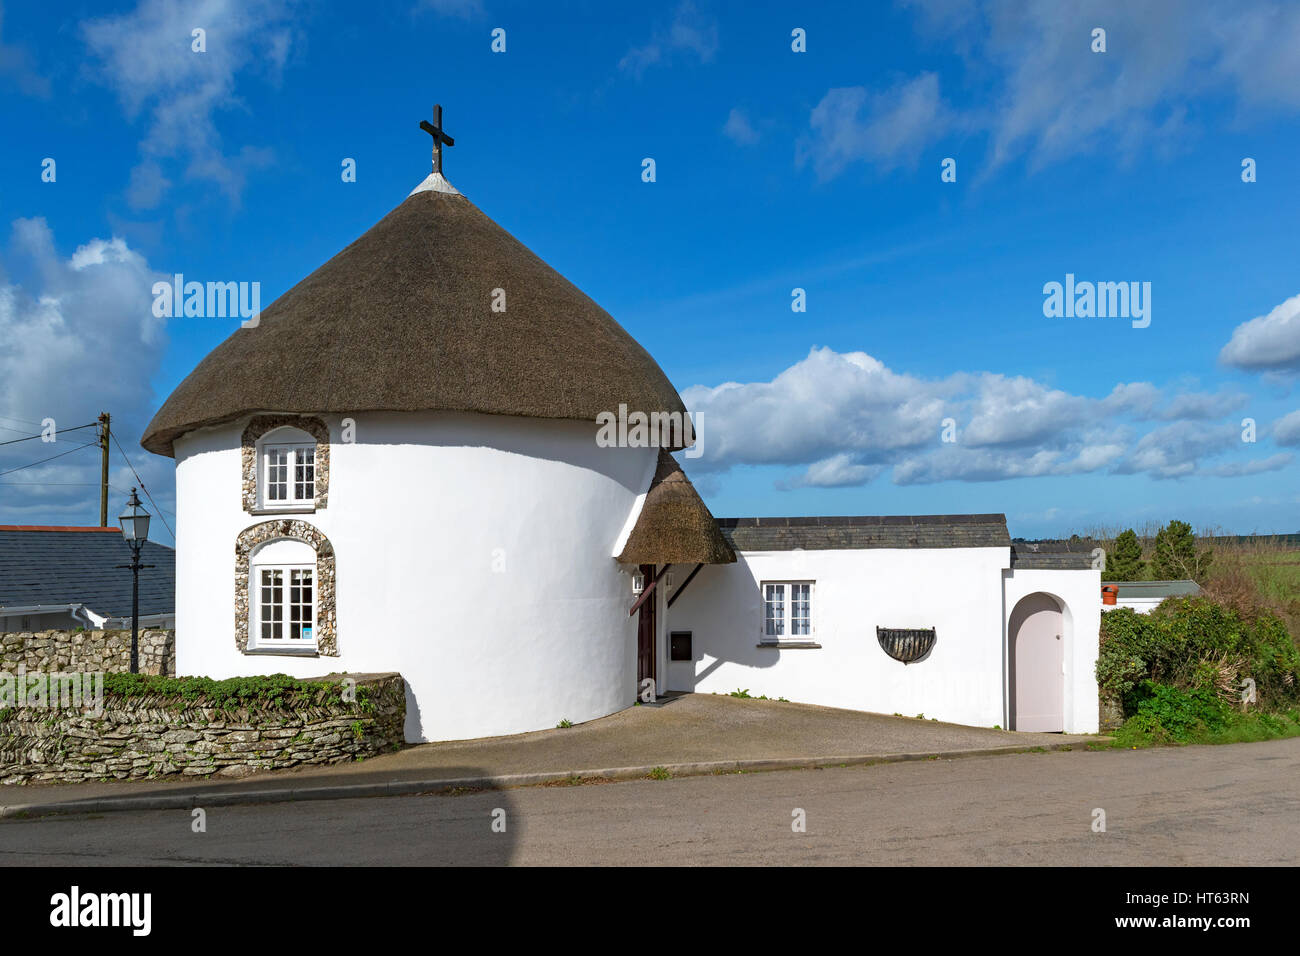 A Roundhouse in the village Veryan, Cornwall, England, UK. Stock Photo